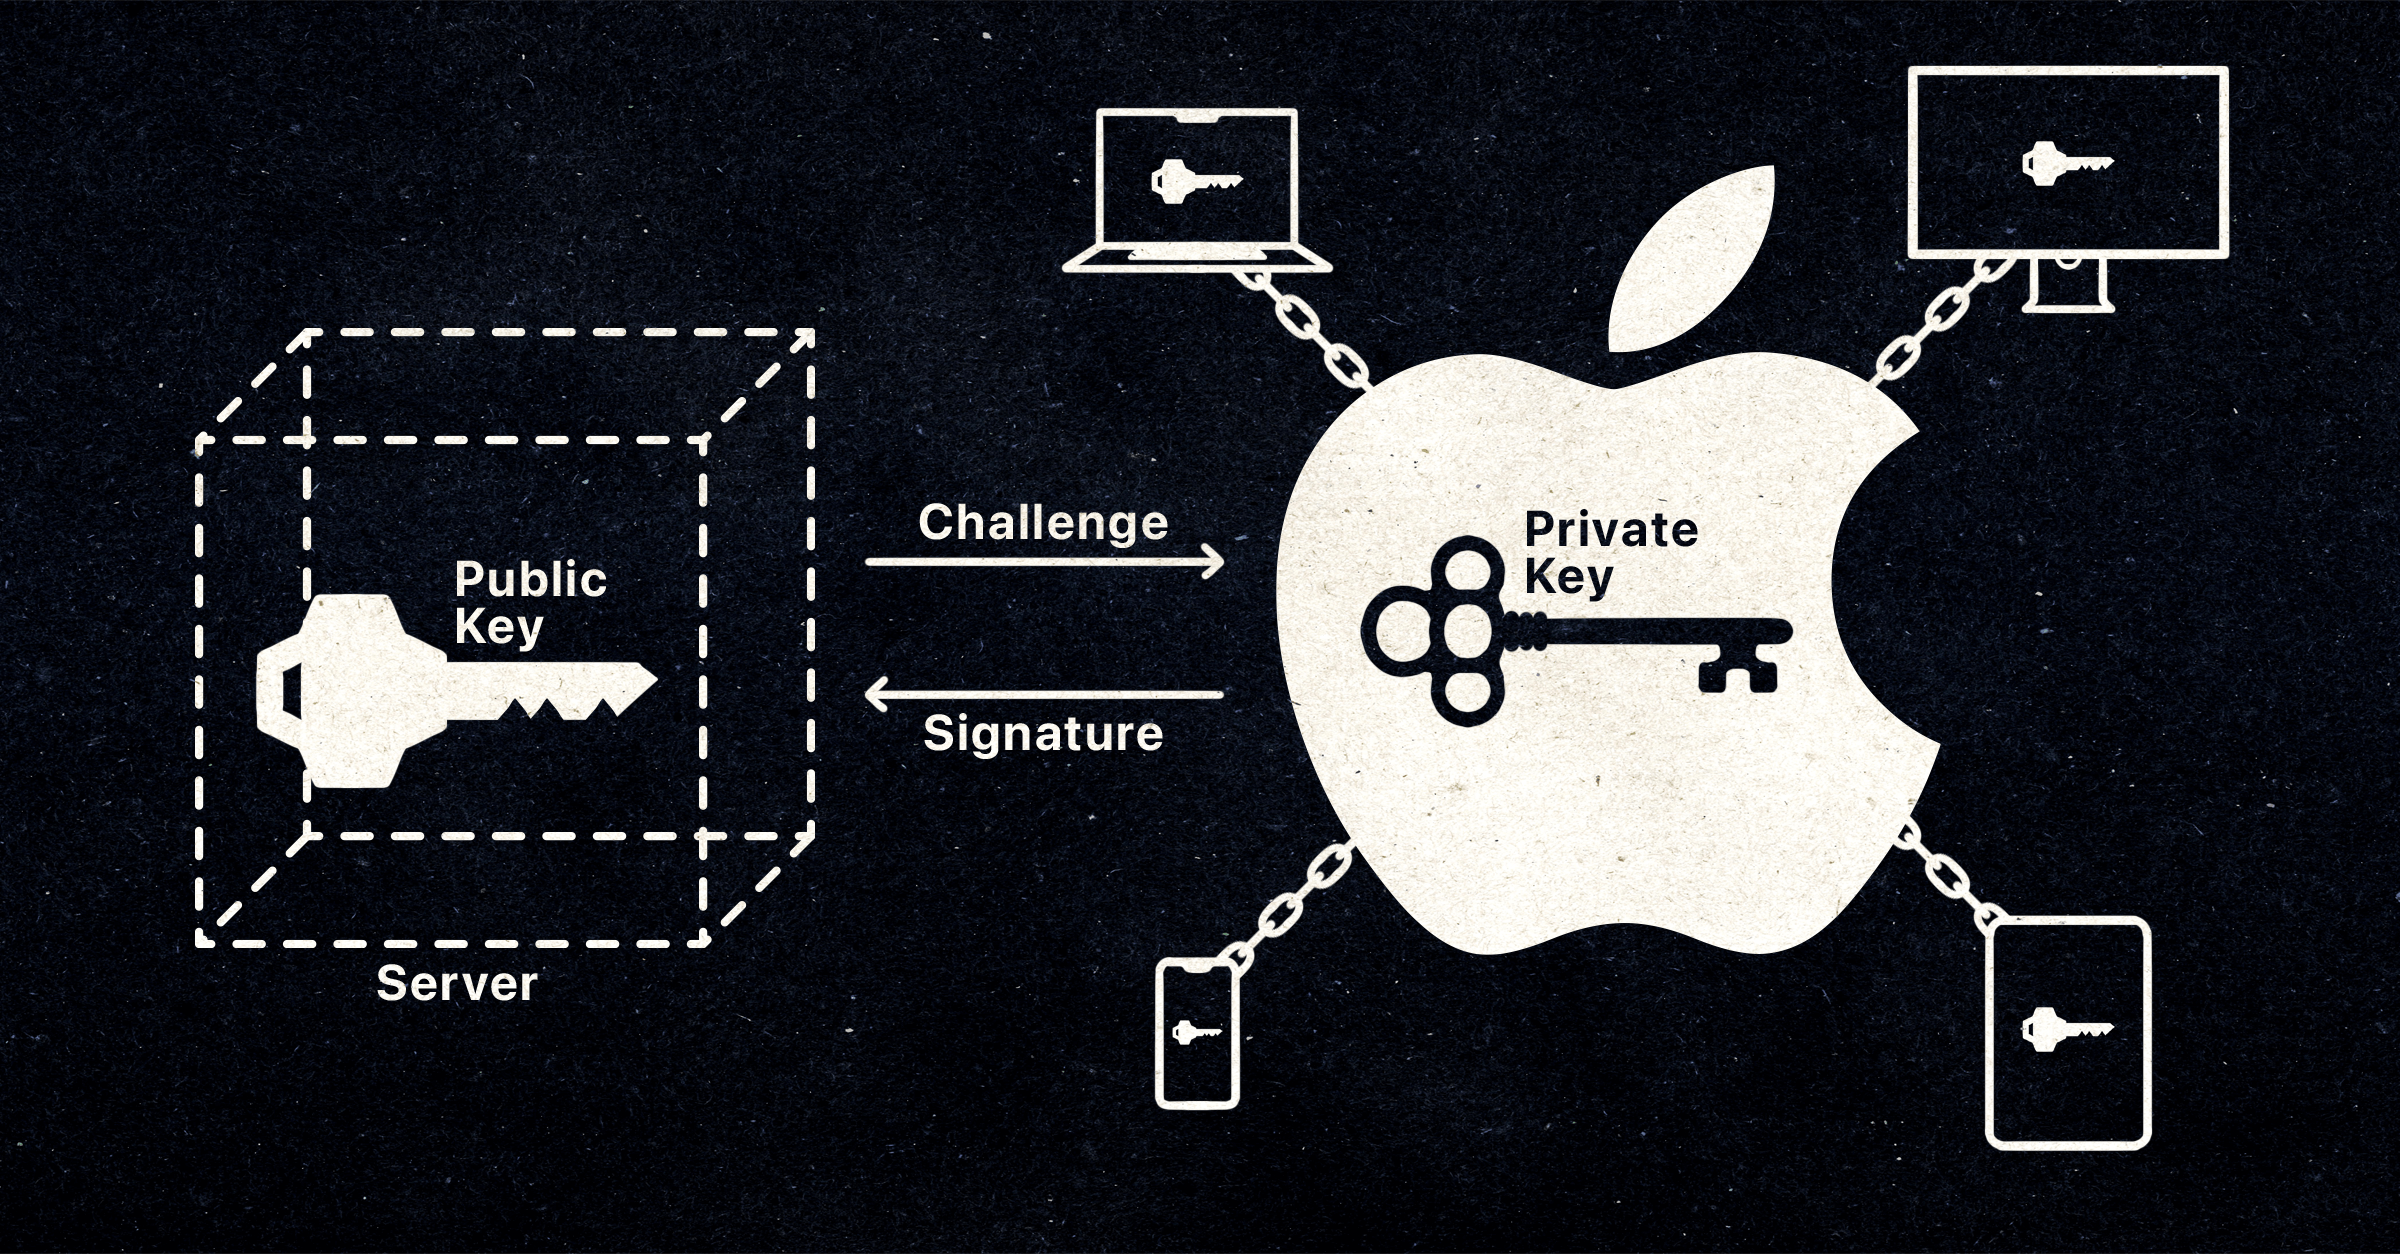 A graphic illustrating how Apple passkeys communicate with servers and share private keys via the Keychain